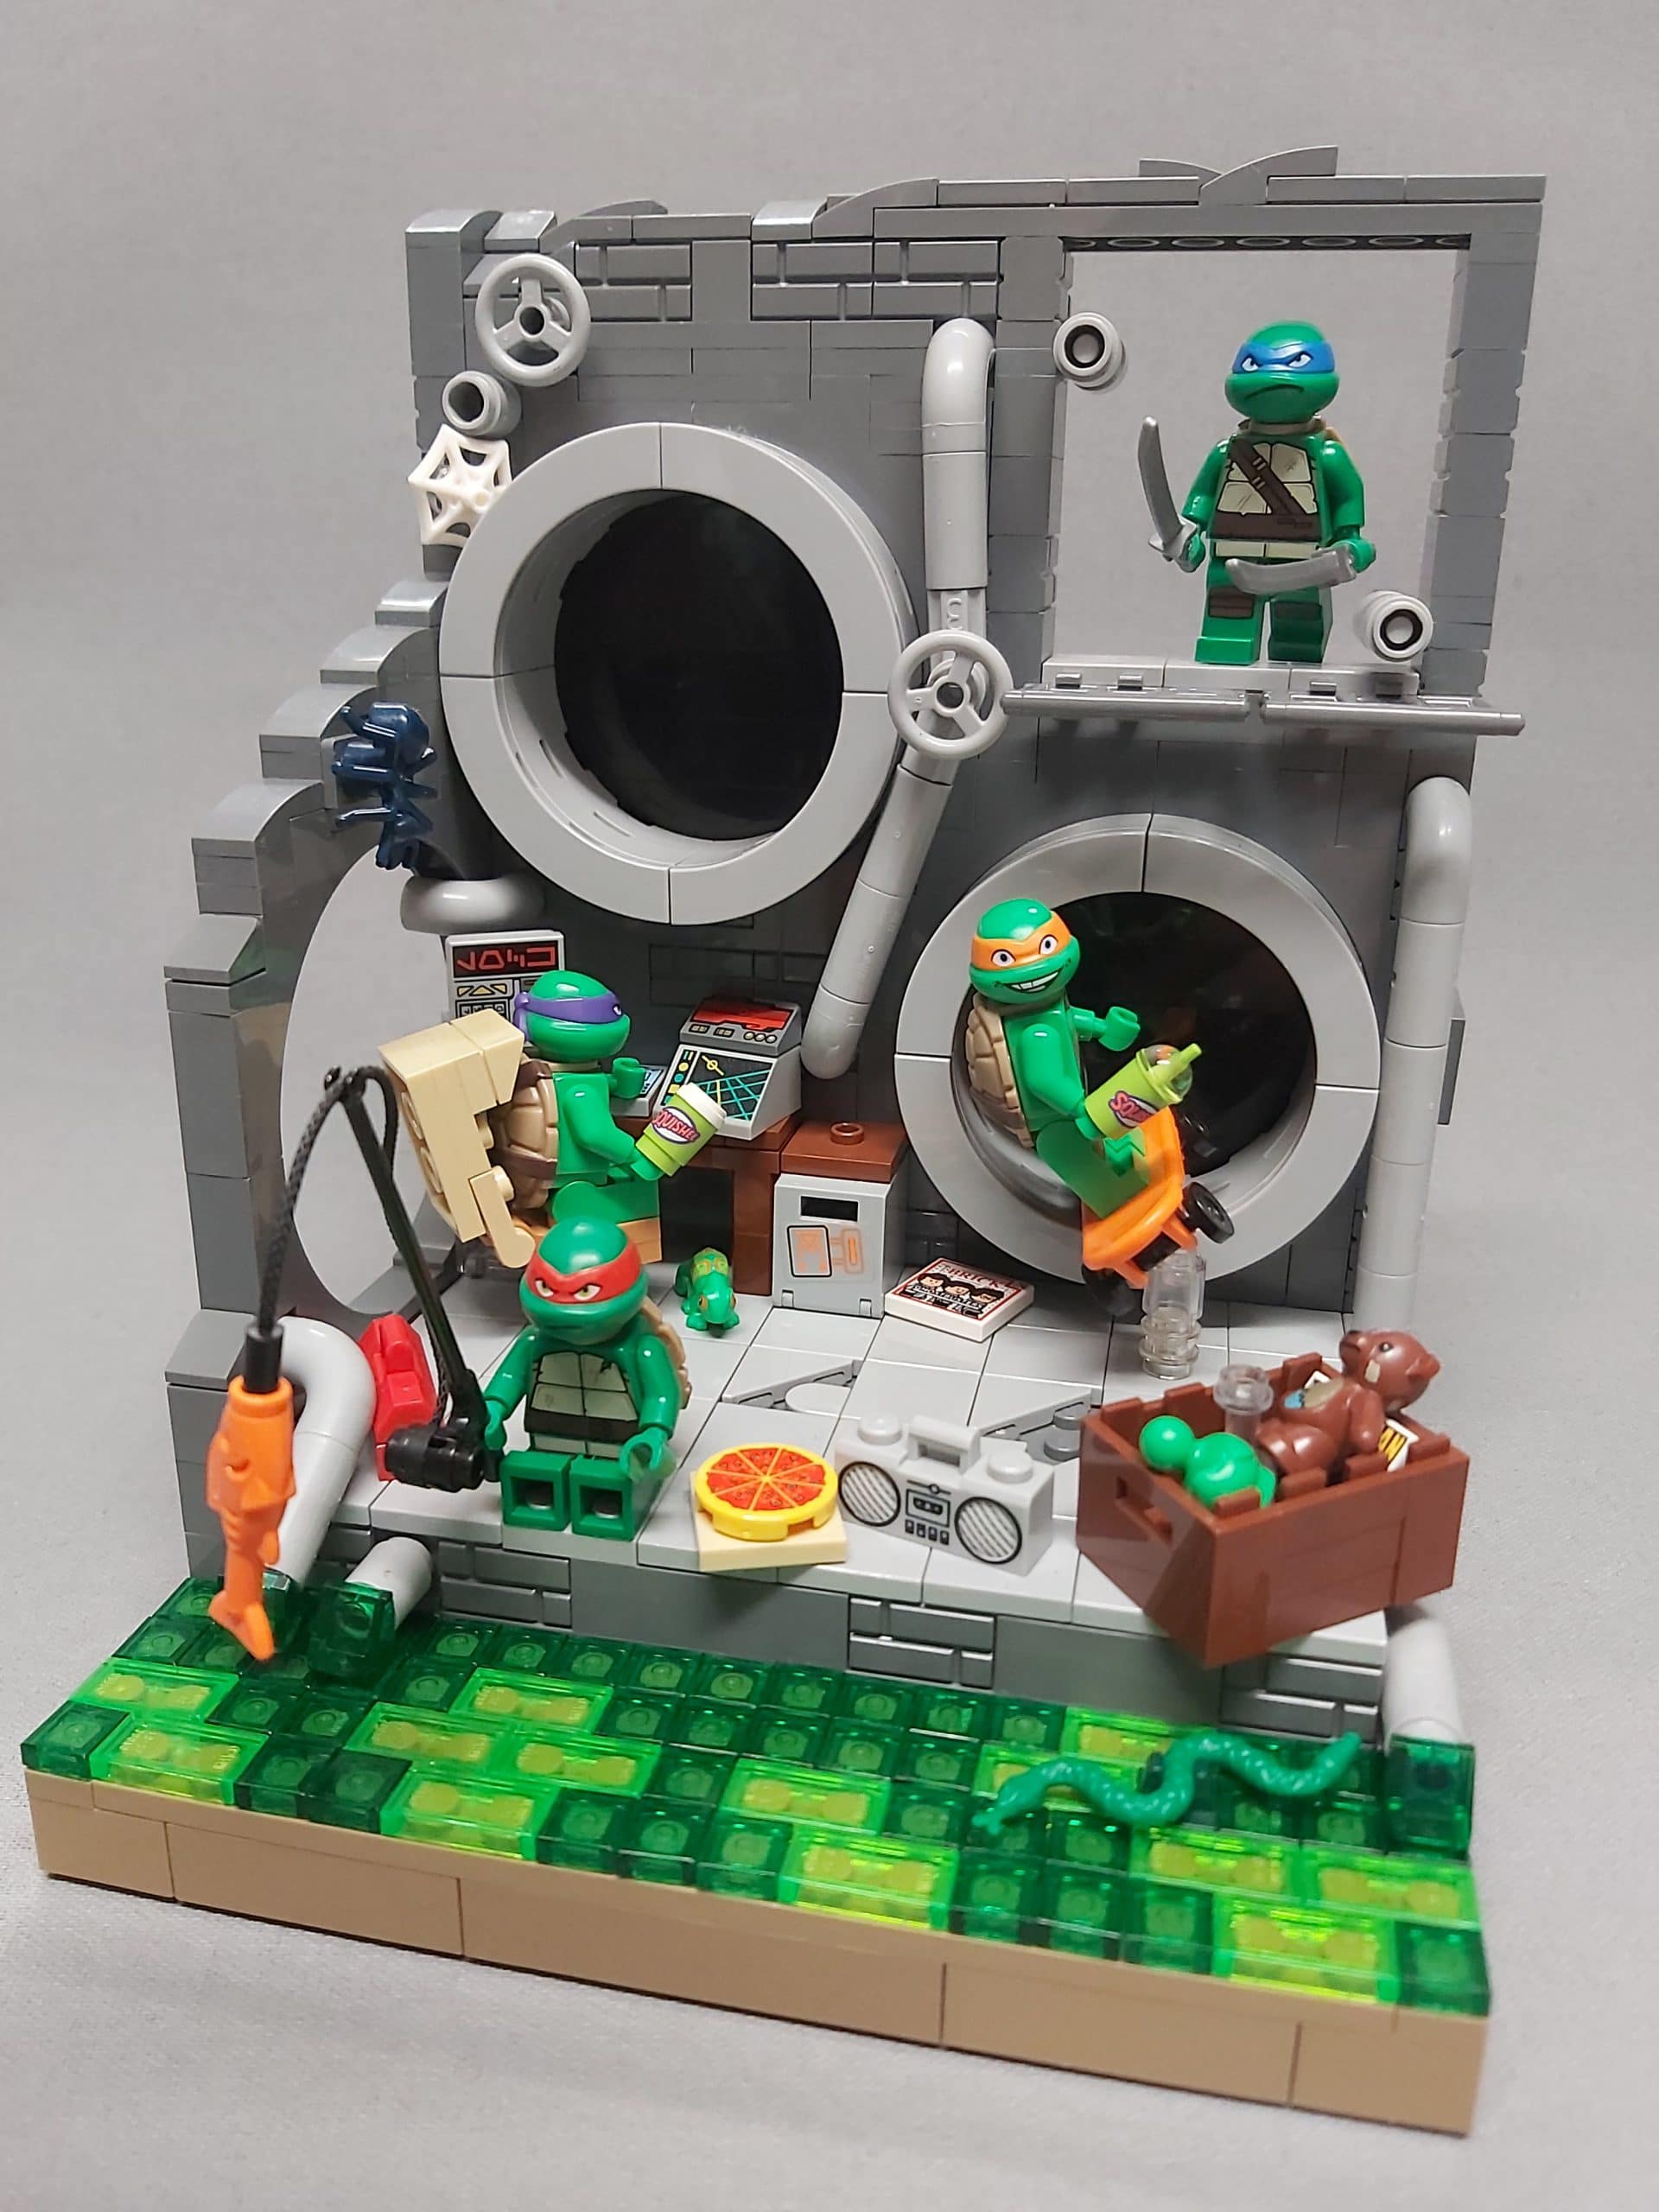 Vote to Support the First Sewer-Themed LEGO